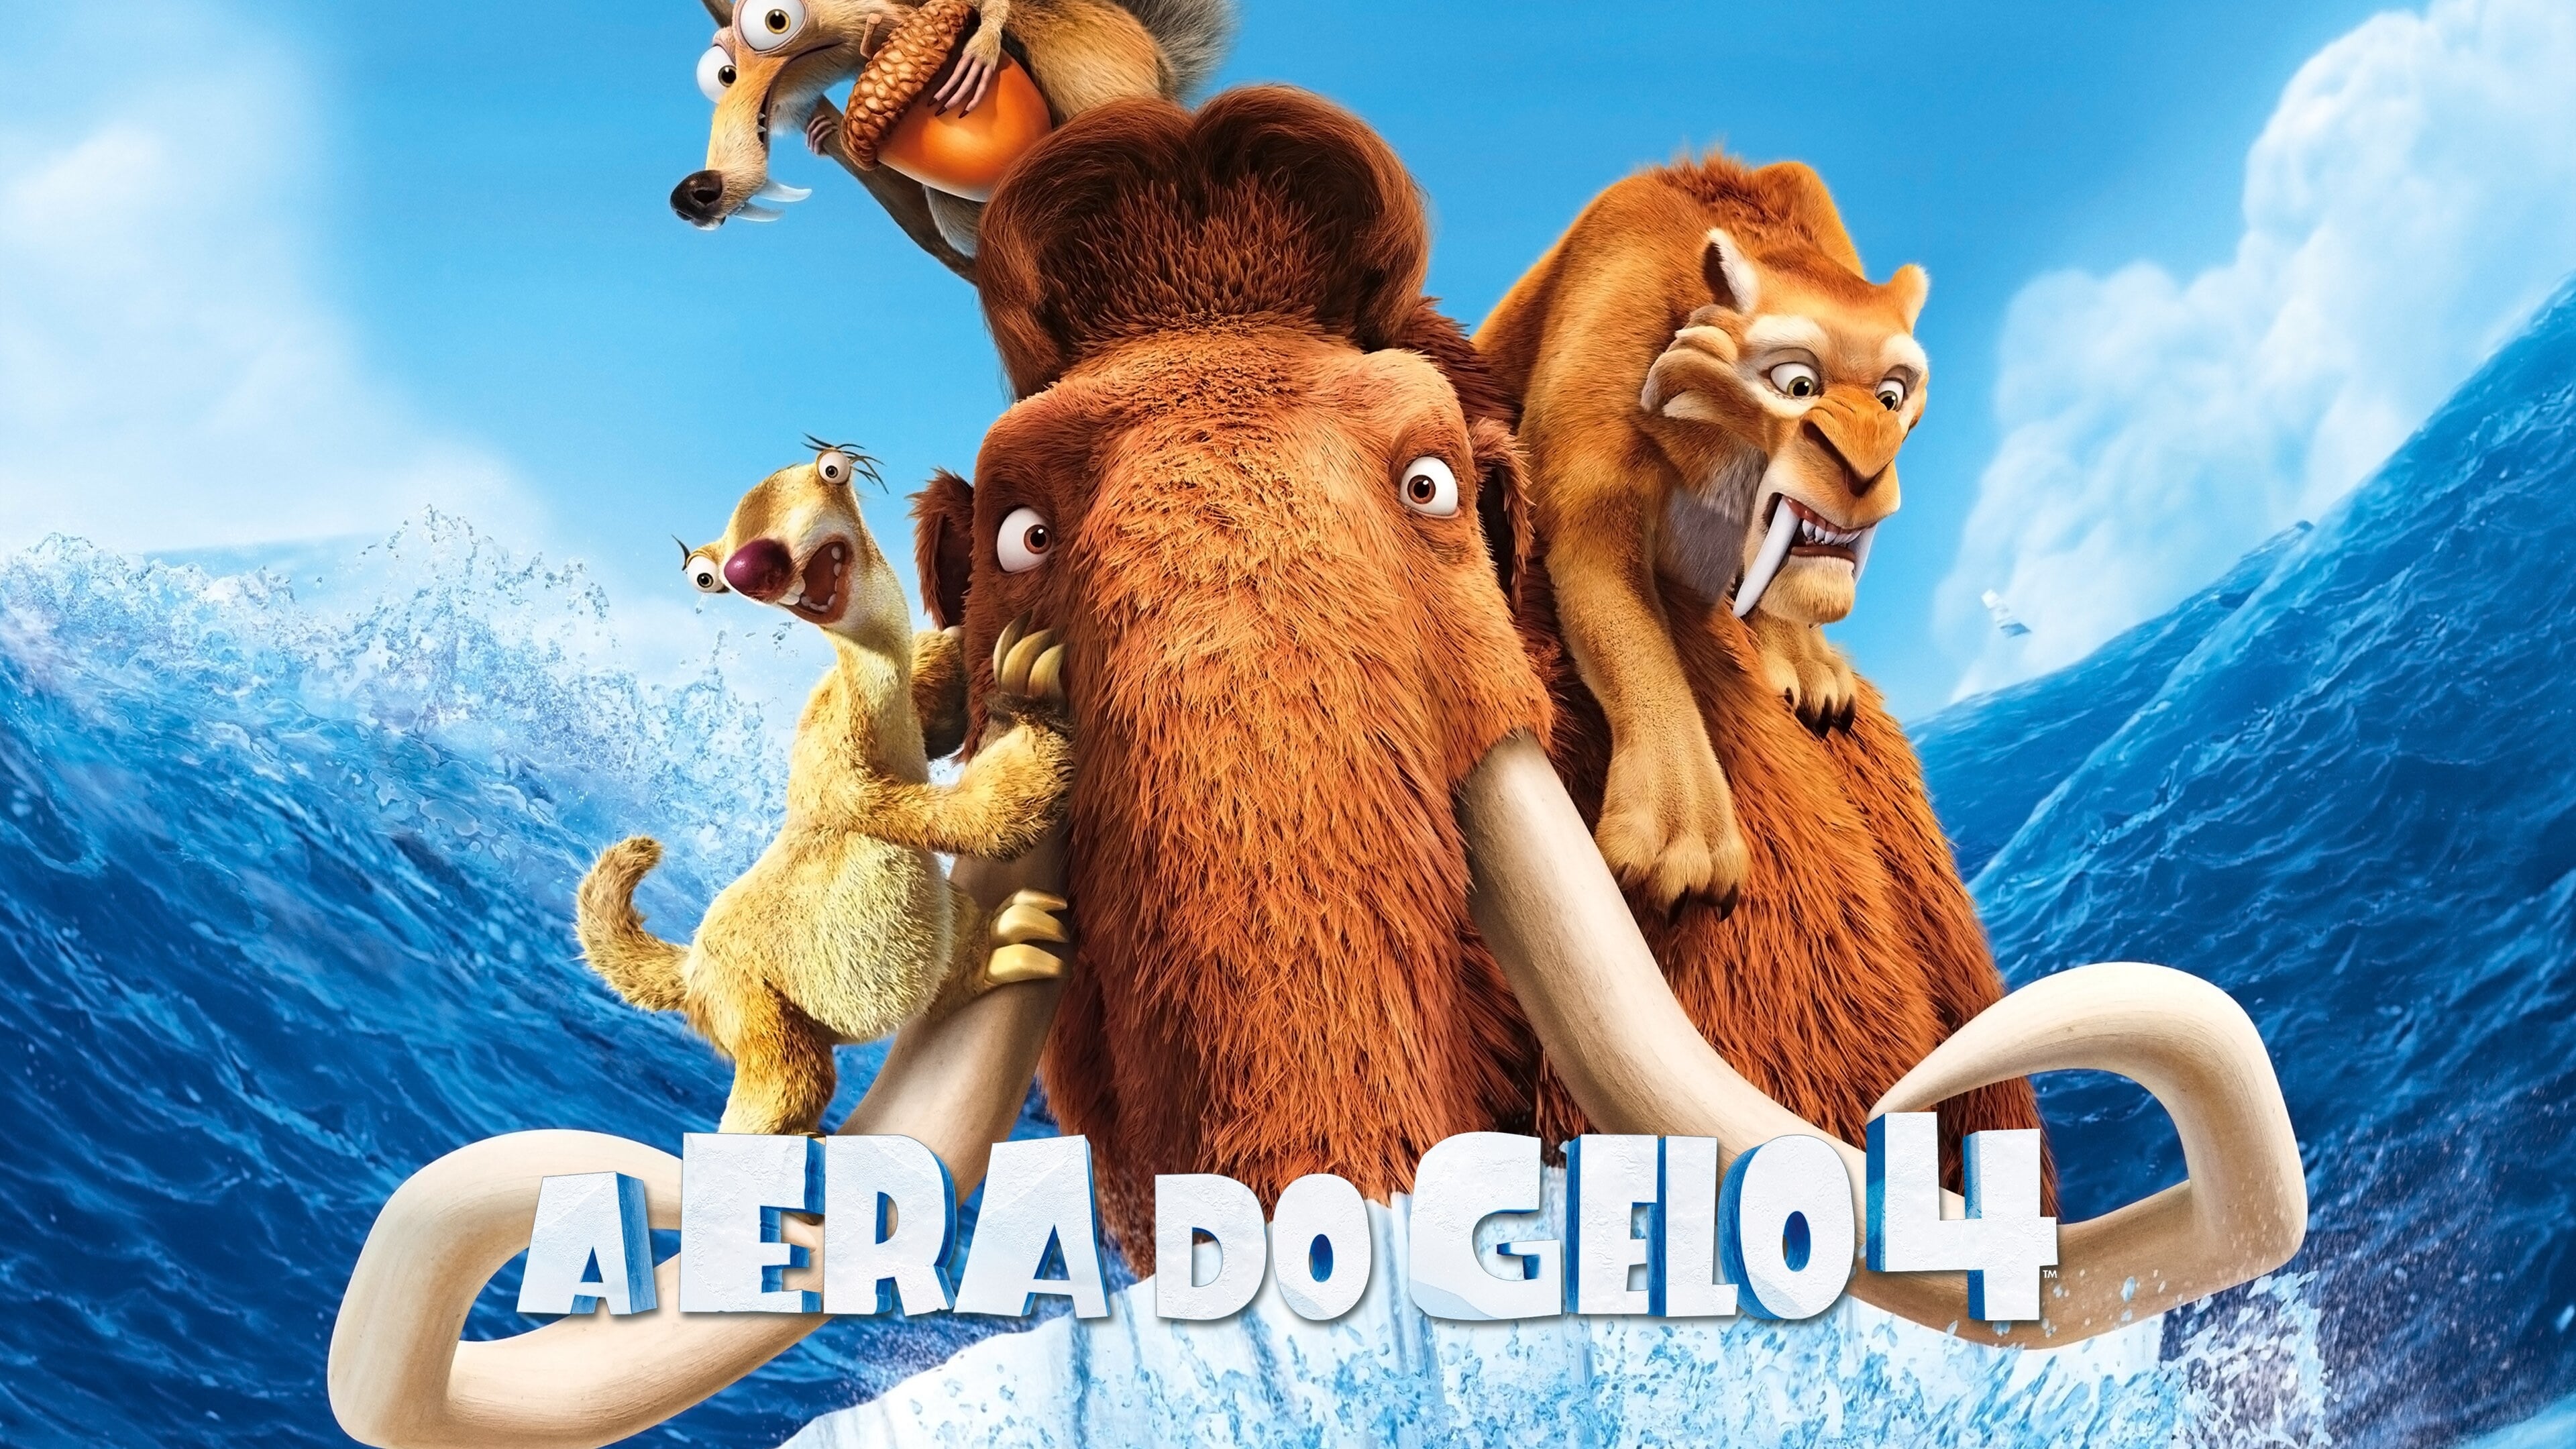 Watch Ice Age: Continental Drift (2012) : Manny, Diego, And Sid Embark Upon...